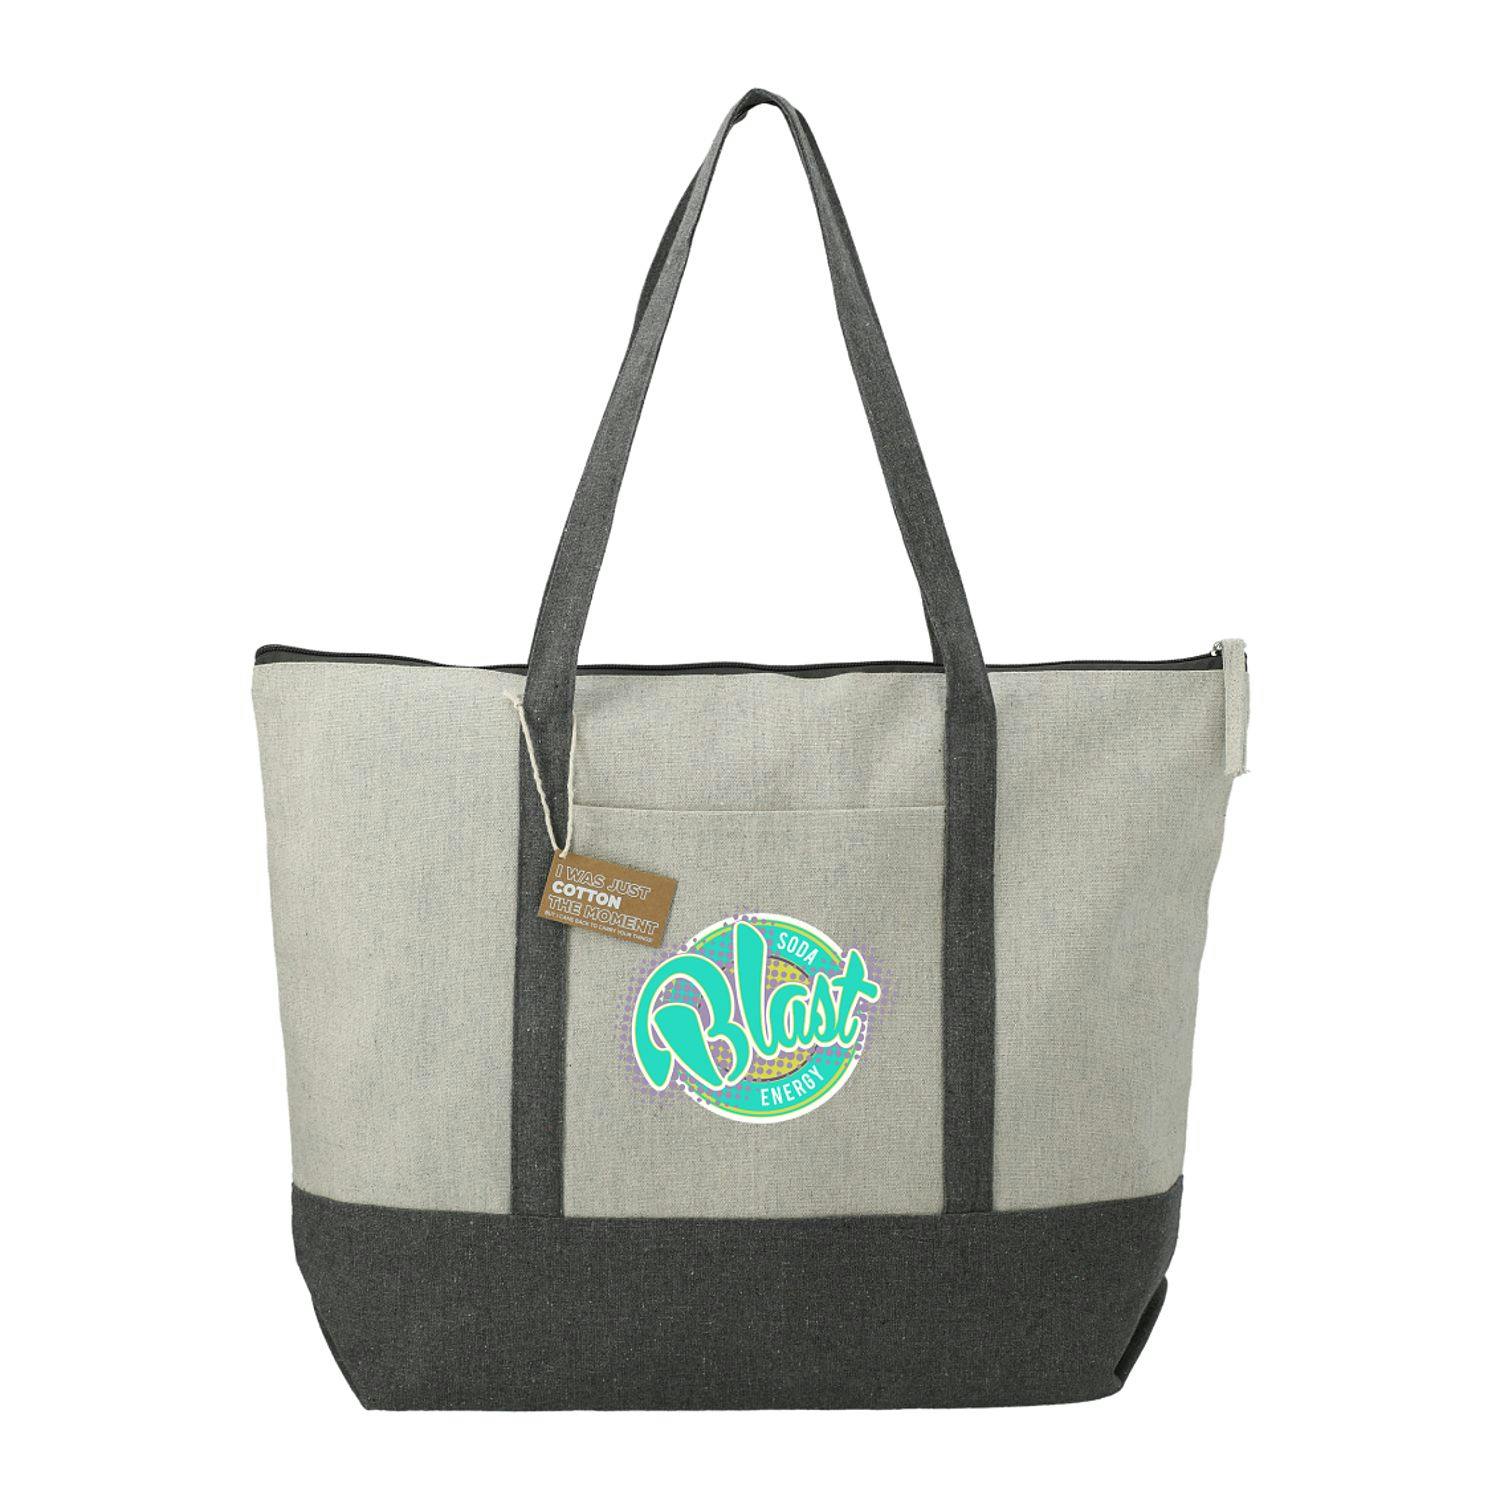 Repose 10oz Recycled Cotton Zippered Tote - additional Image 2